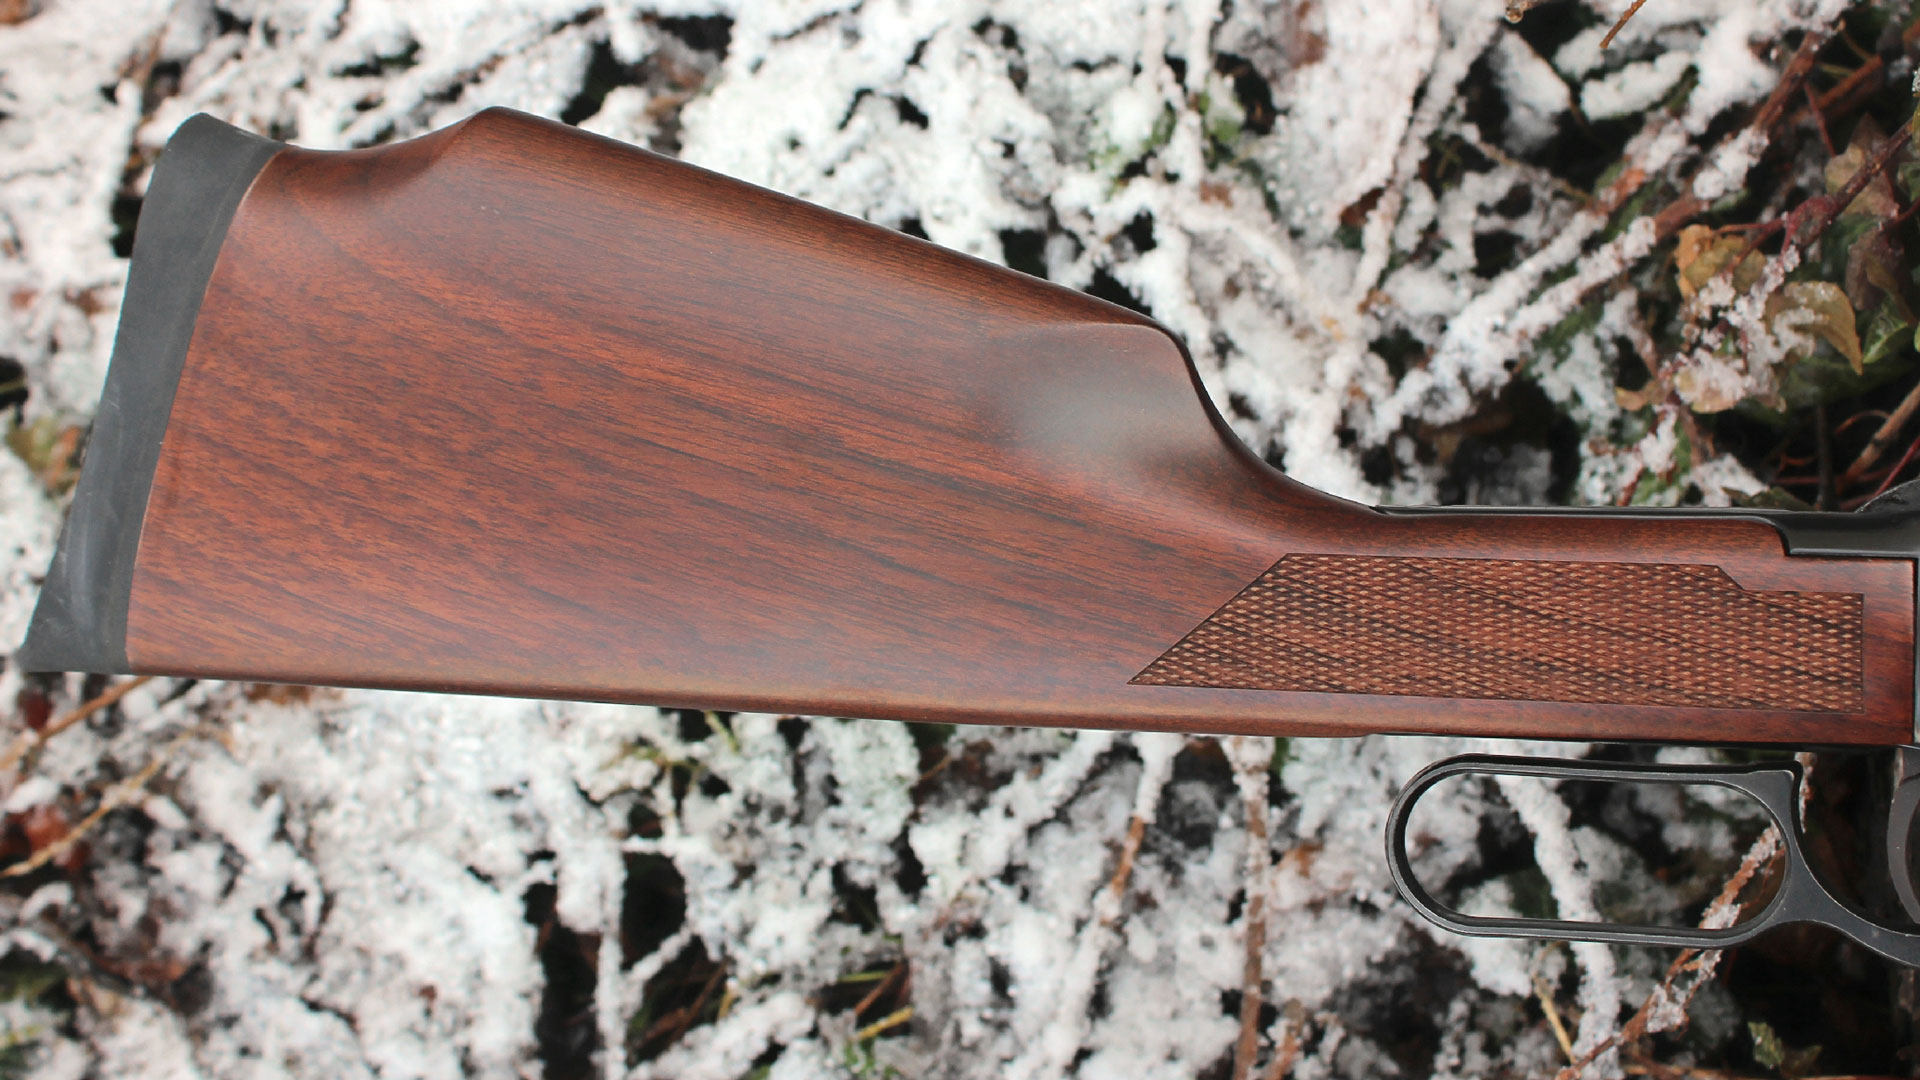 Wood stock with raised comb